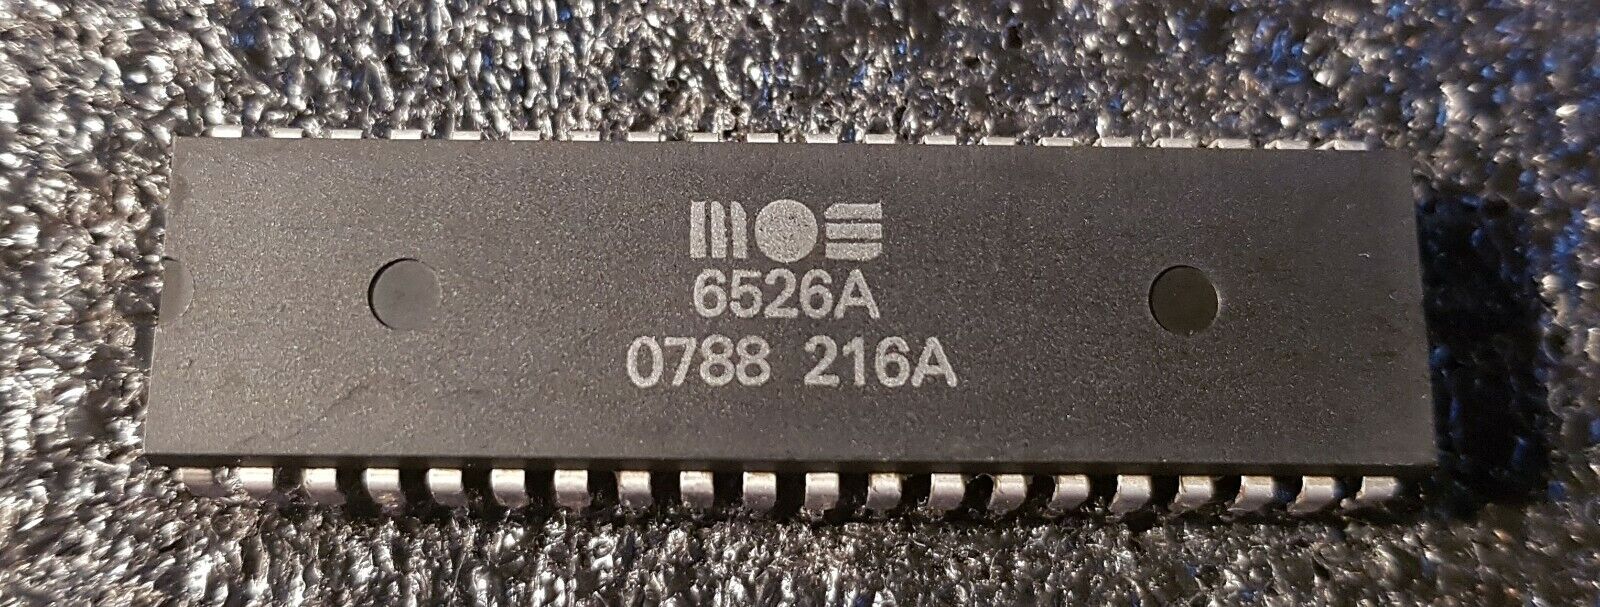 MOS 6526A CIA, Chip for Commodore 64/128/1570/1571, Genuine part working.